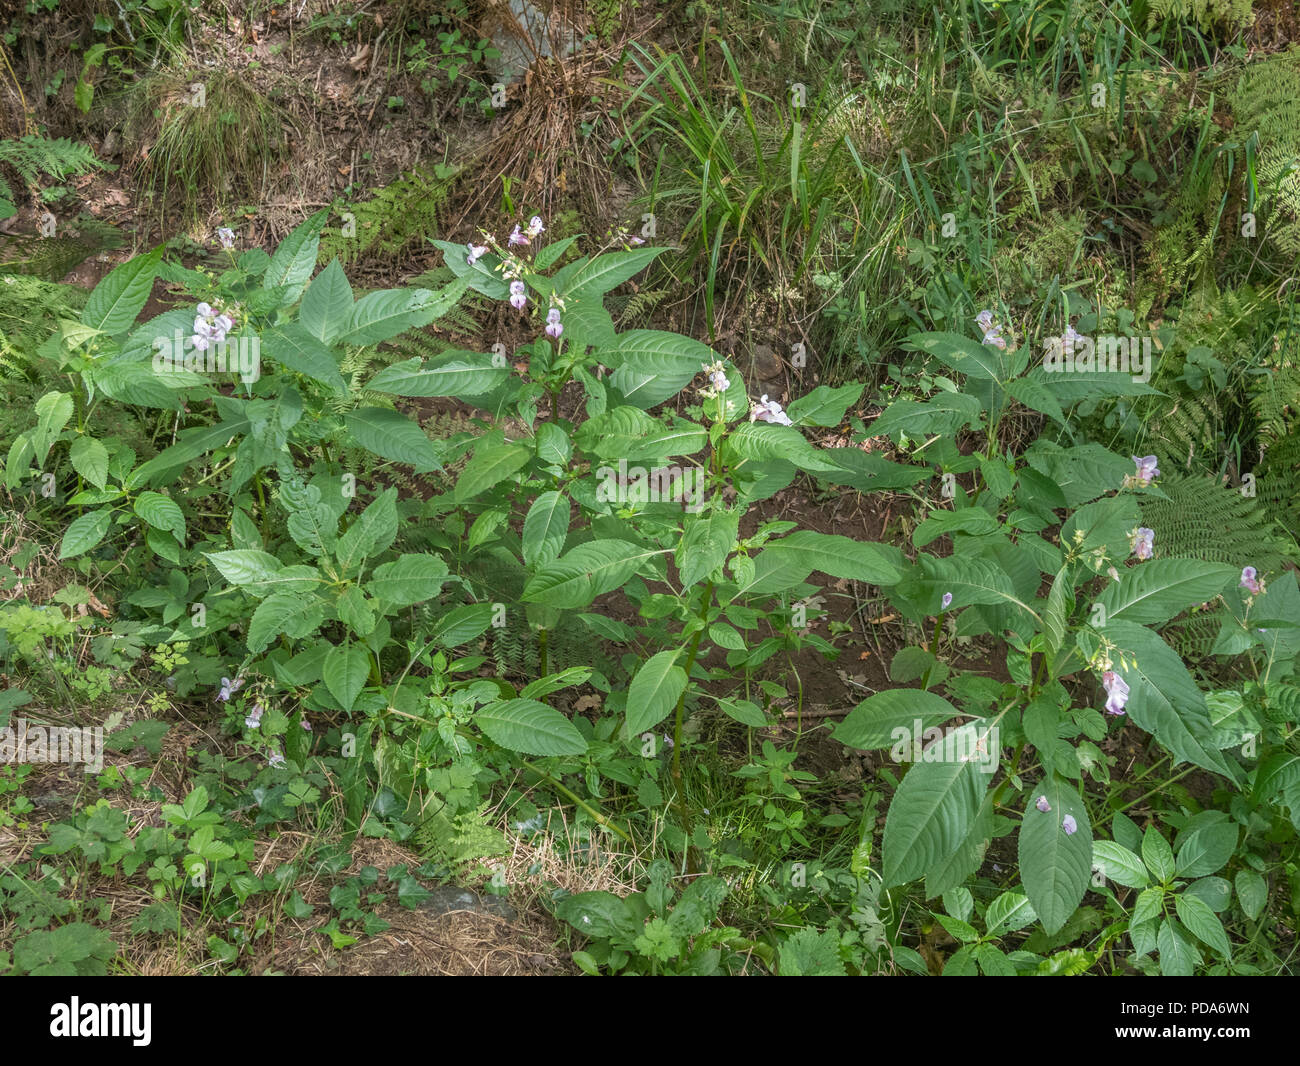 Specimens of Himalayan Balsam / Impatiens gladulifera in a dried up drainage ditch during 2018 heatwave in UK. Invasive weeds which likes wet ground. Stock Photo